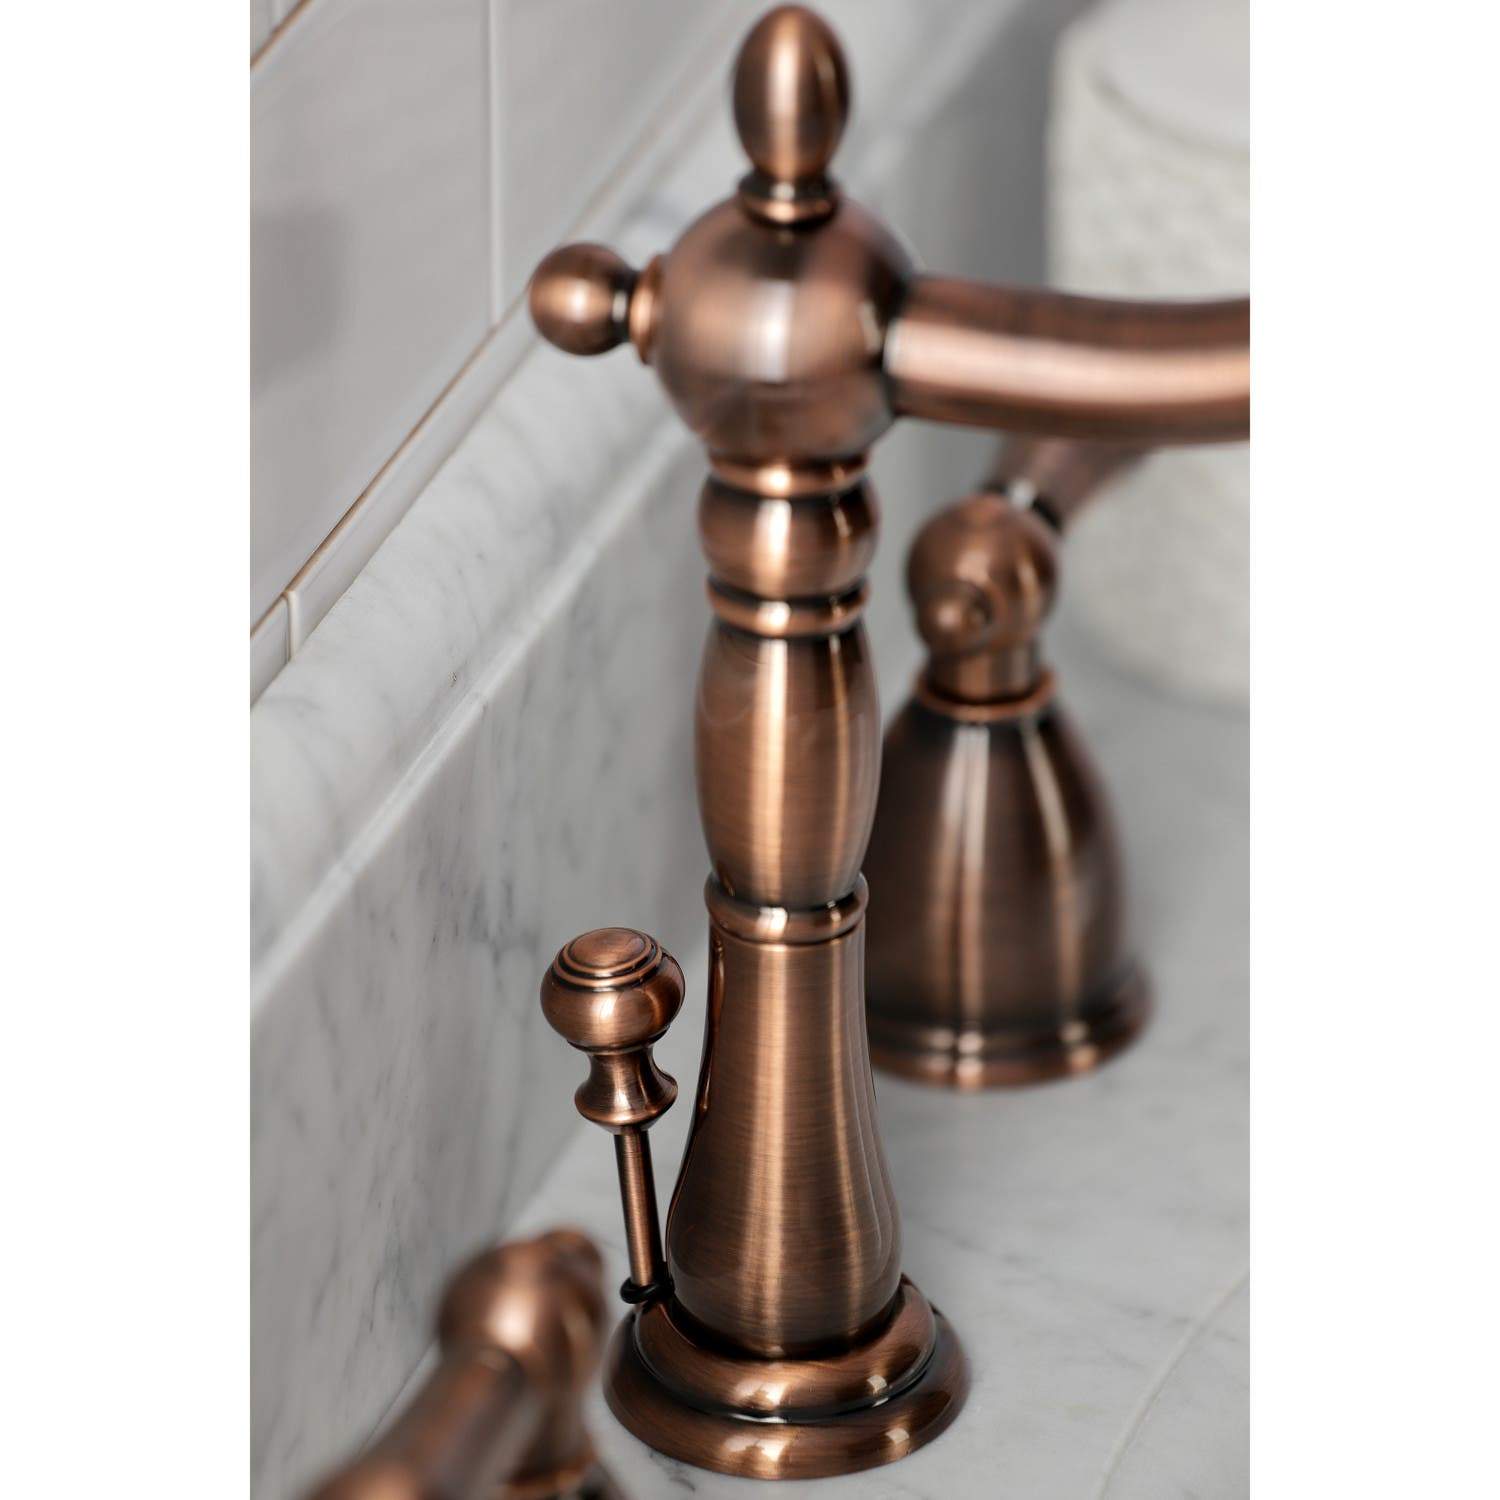 Kingston Brass KB197ALAC 8 in. Widespread Bathroom Faucet, Antique Copper